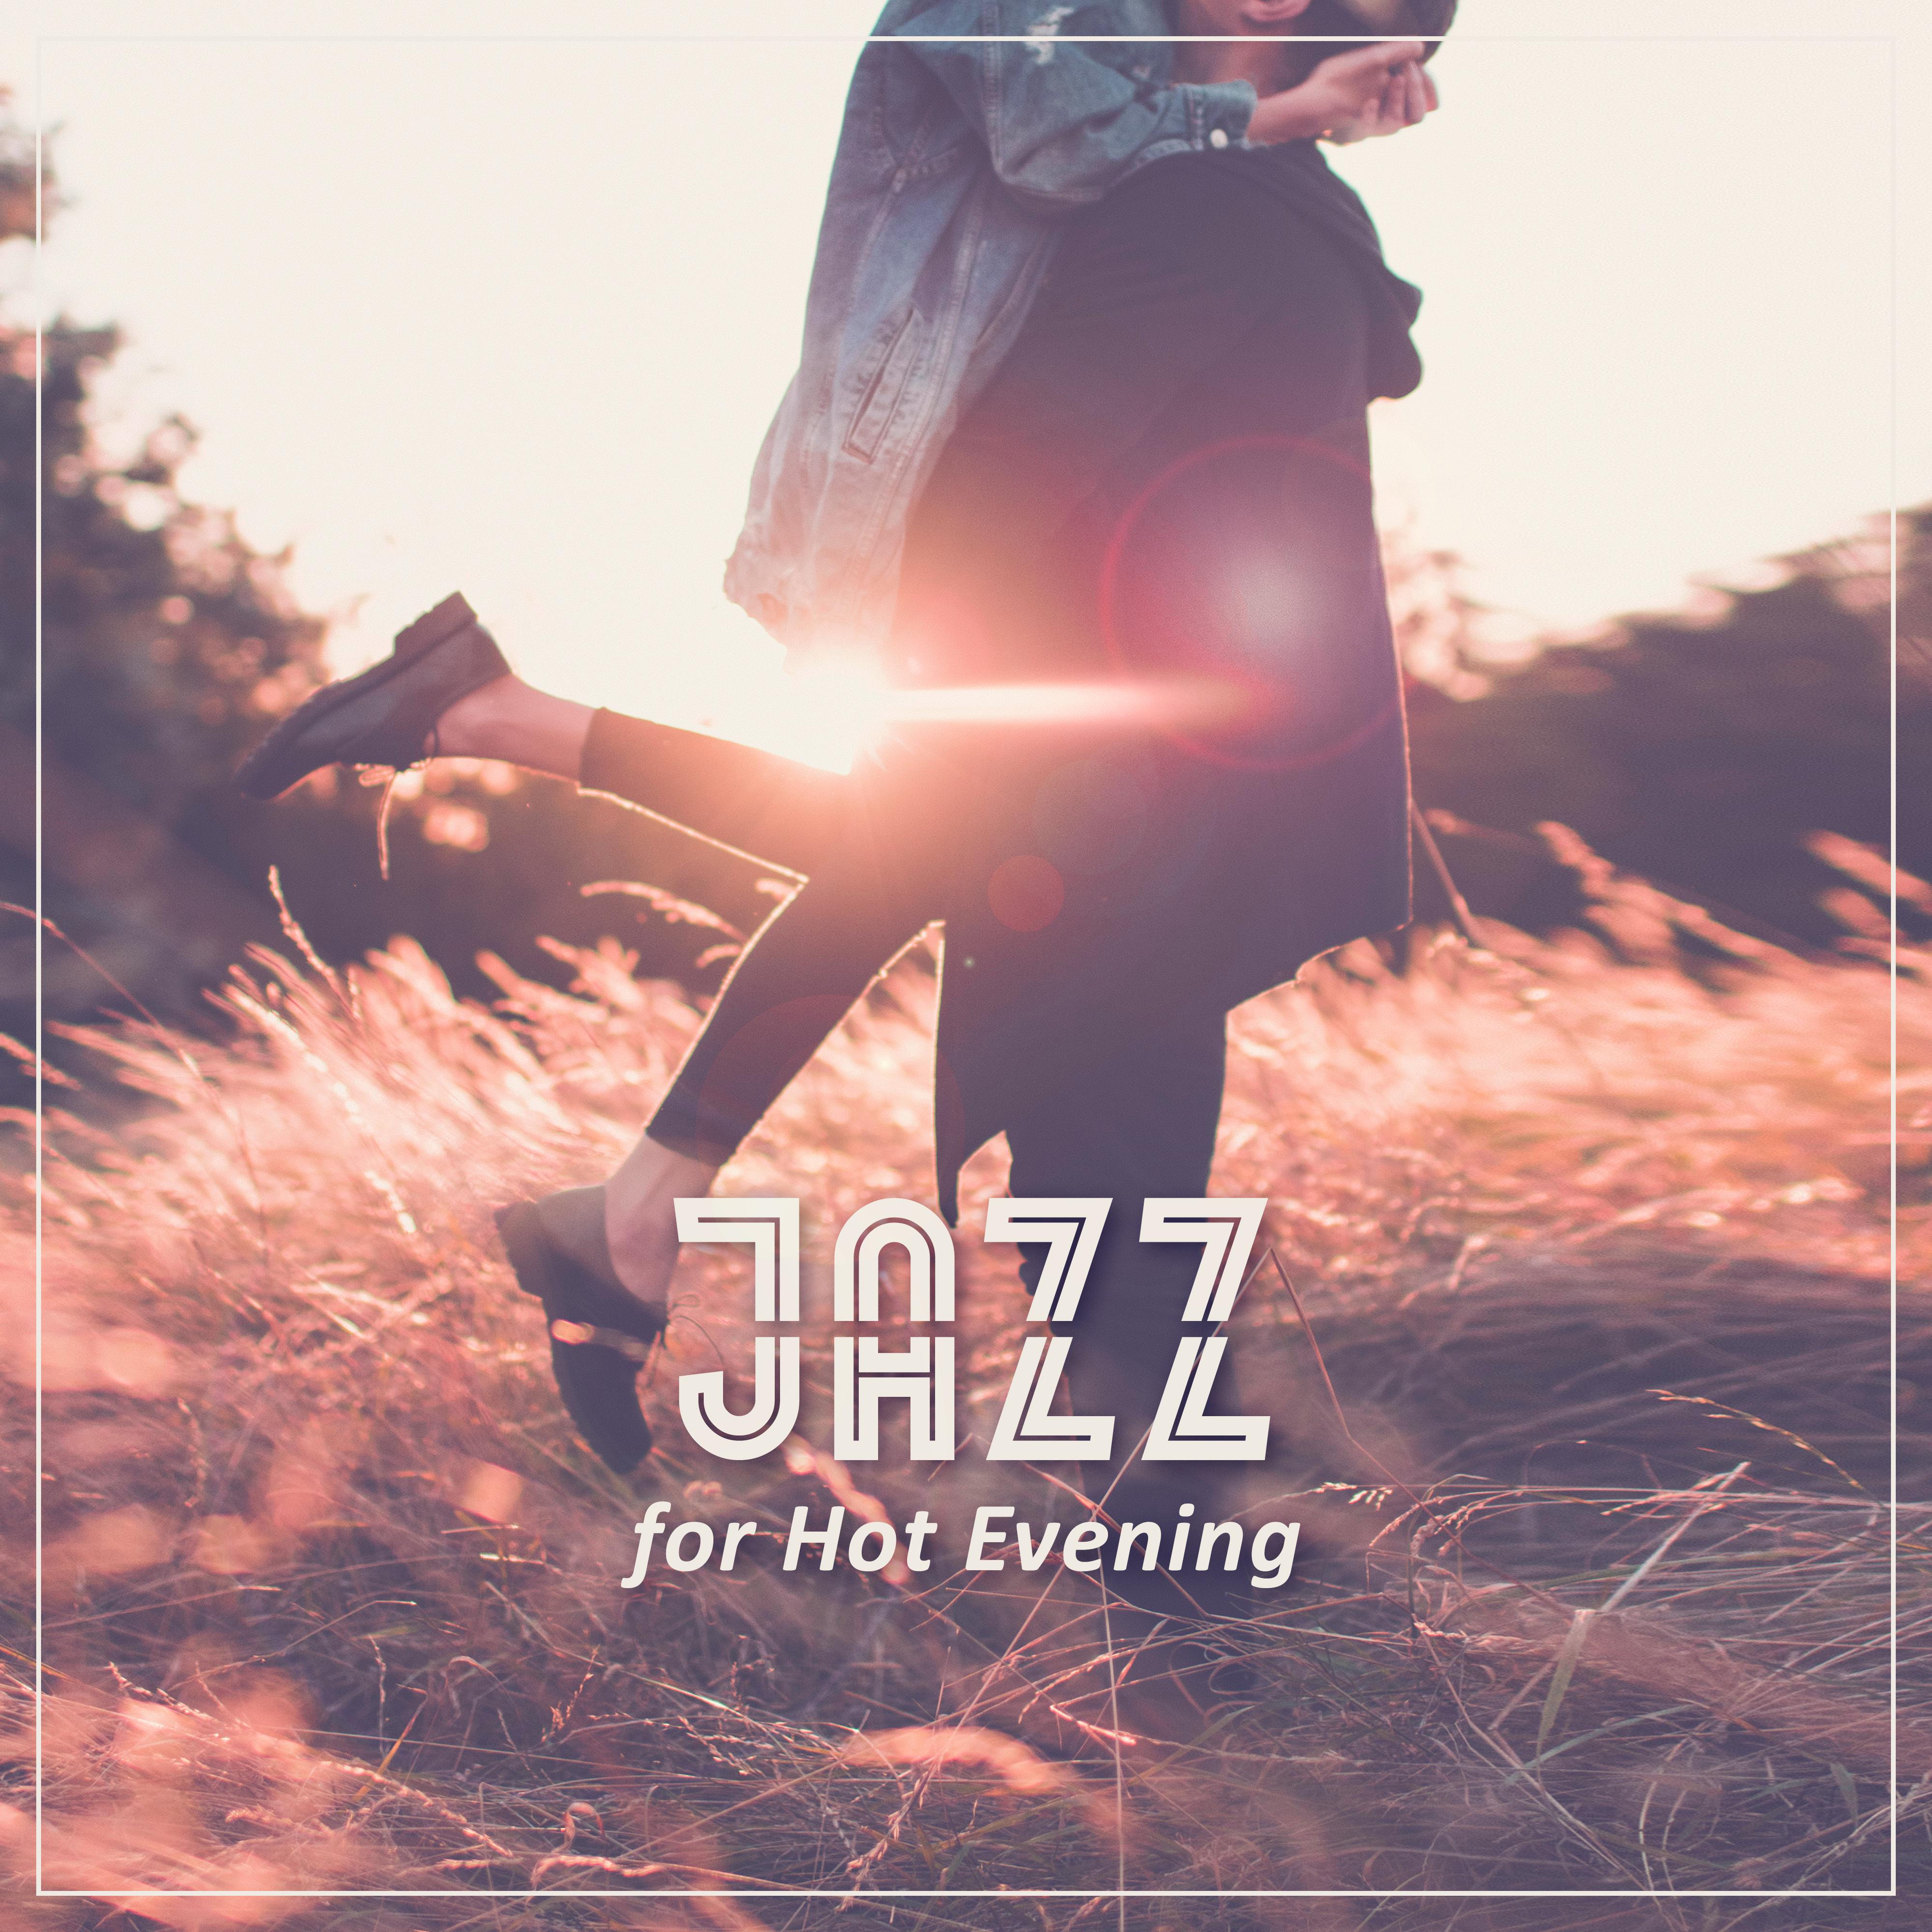 Jazz for Hot Evening  Sounds for Sensual Night, Lovers Music, Hot Jazz Note, Evening Romance